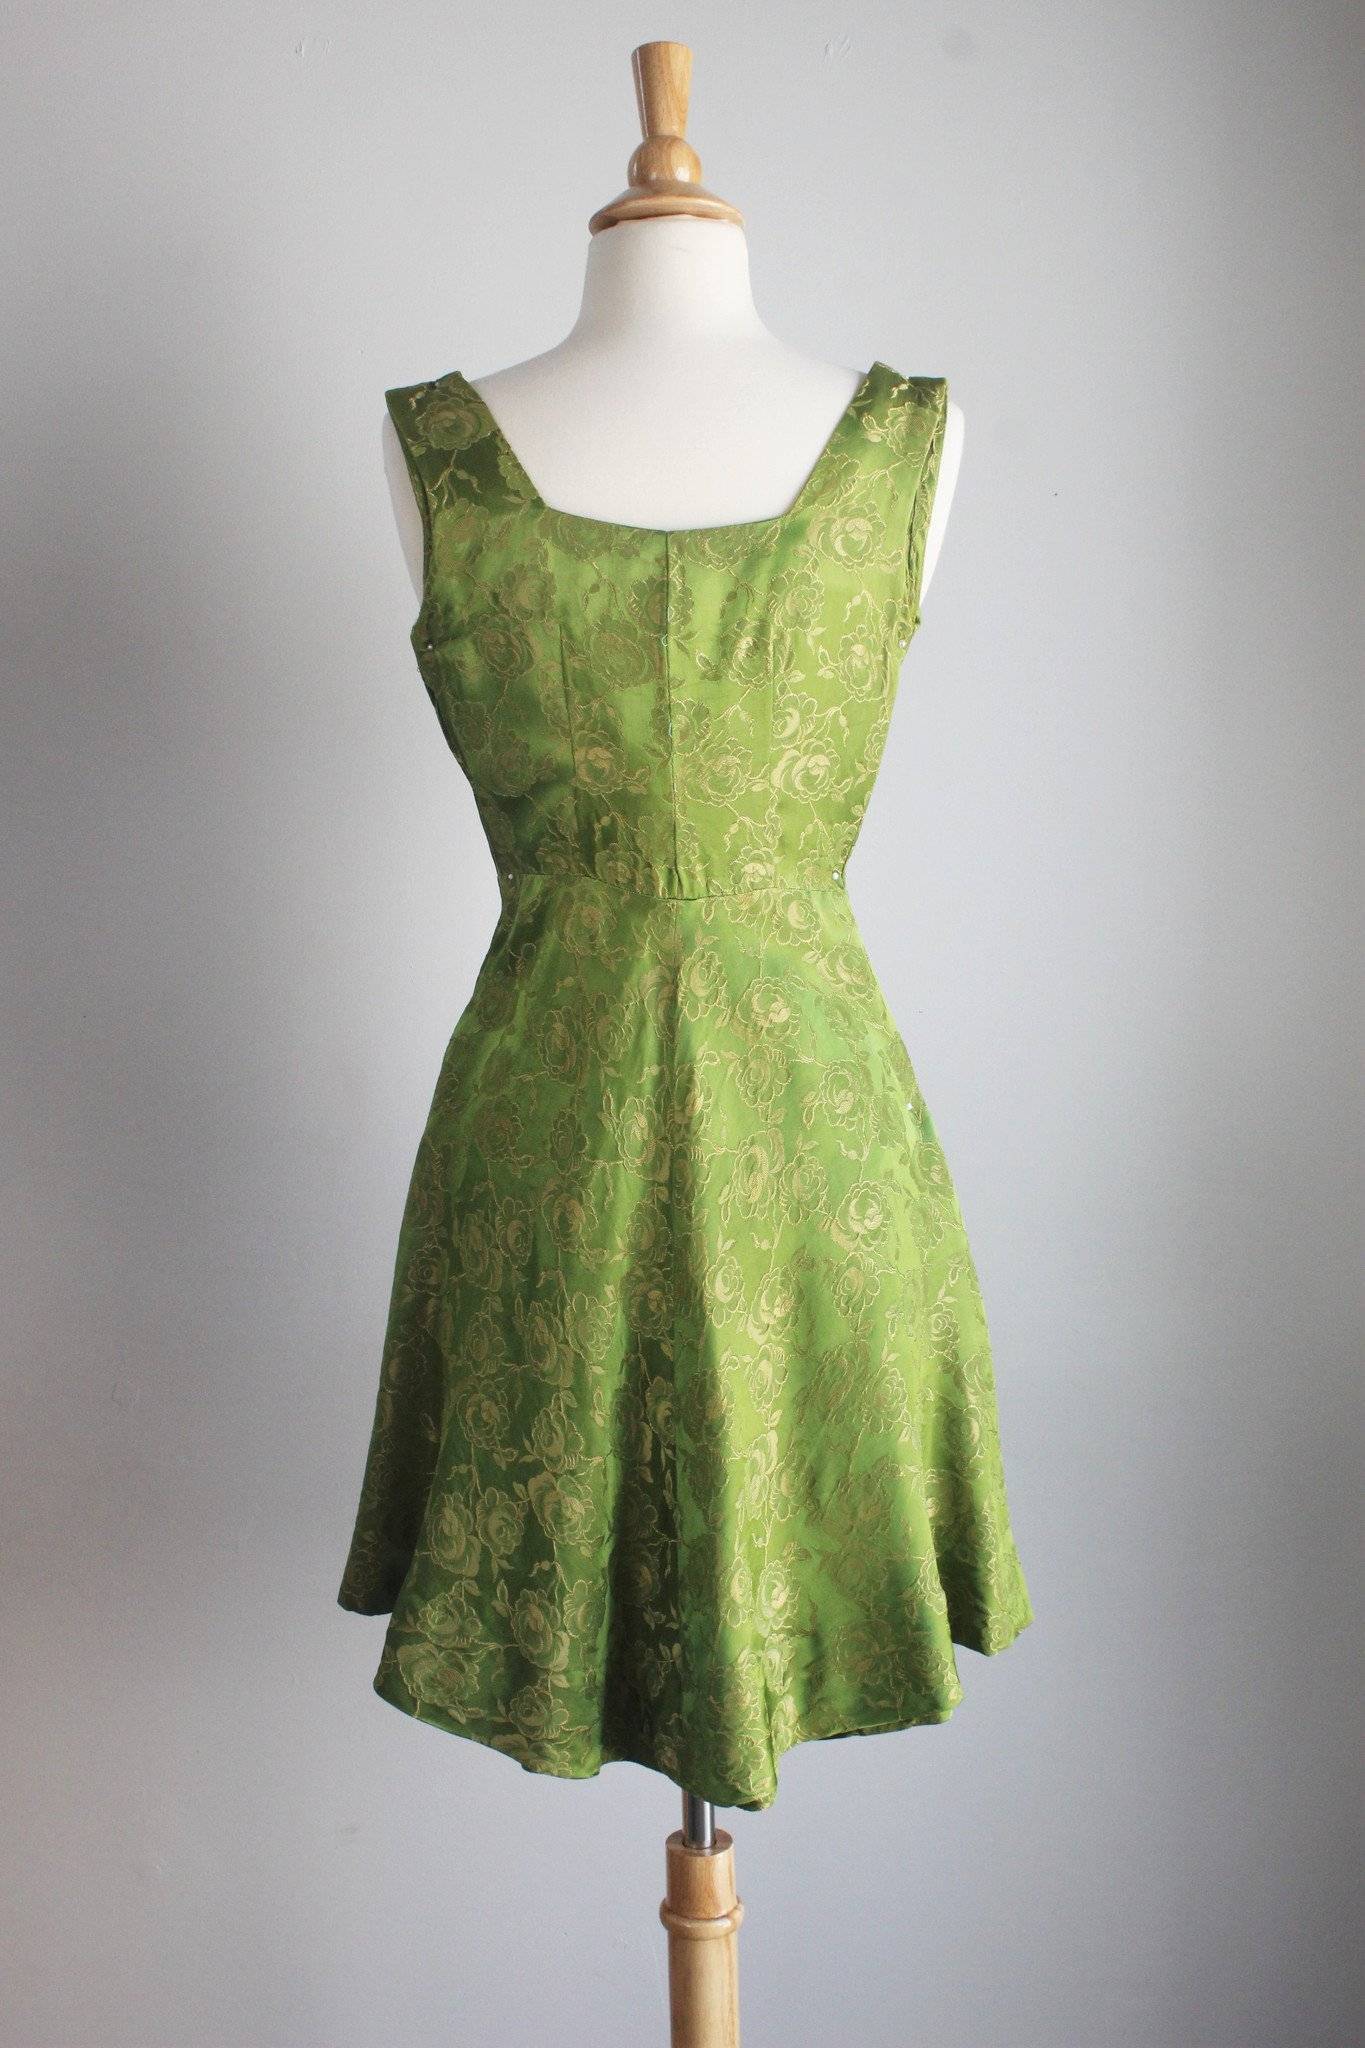 Vintage 1940s Green Damask Fit and Flare Party Dress-Toadstool Farm Vintage-coktaail,Dress,extra small,extra small petite,fit and flare,full skirt,green damask,new look,new look circle,Vintage,Vintage Clothing